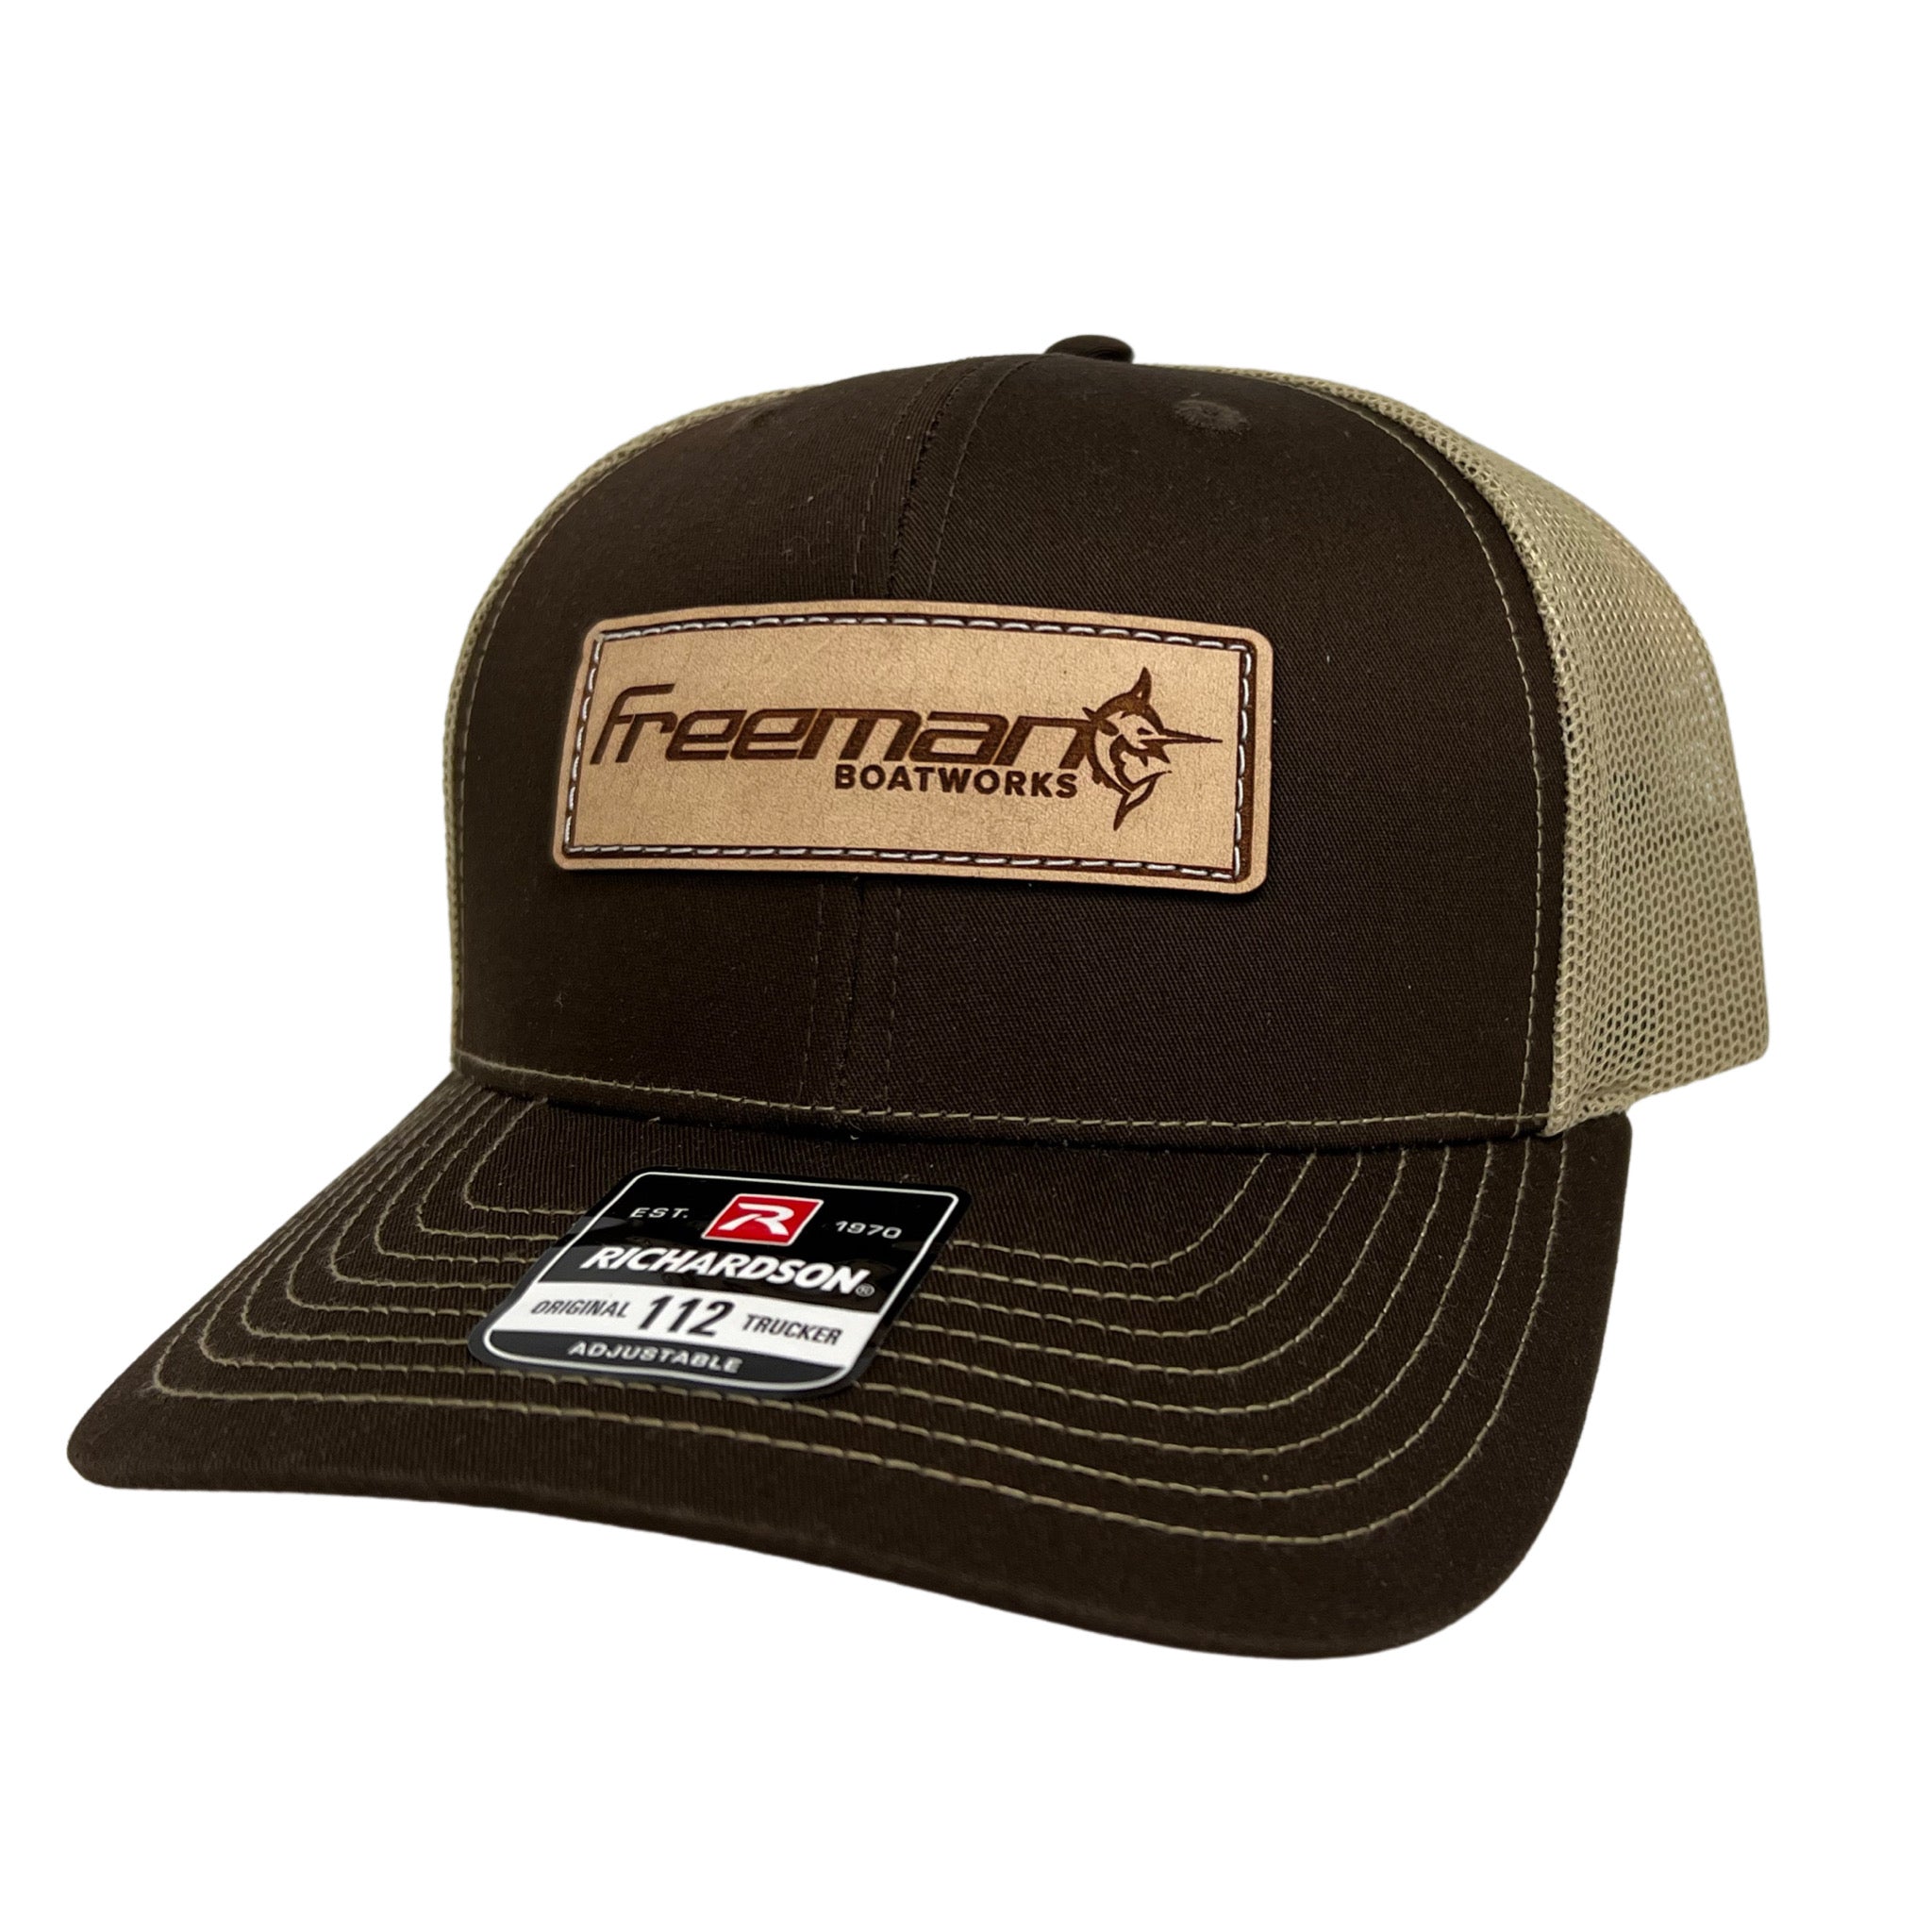 Fish Hard Gear Structured Trucker Hat - Limited Edition Rubber Patch